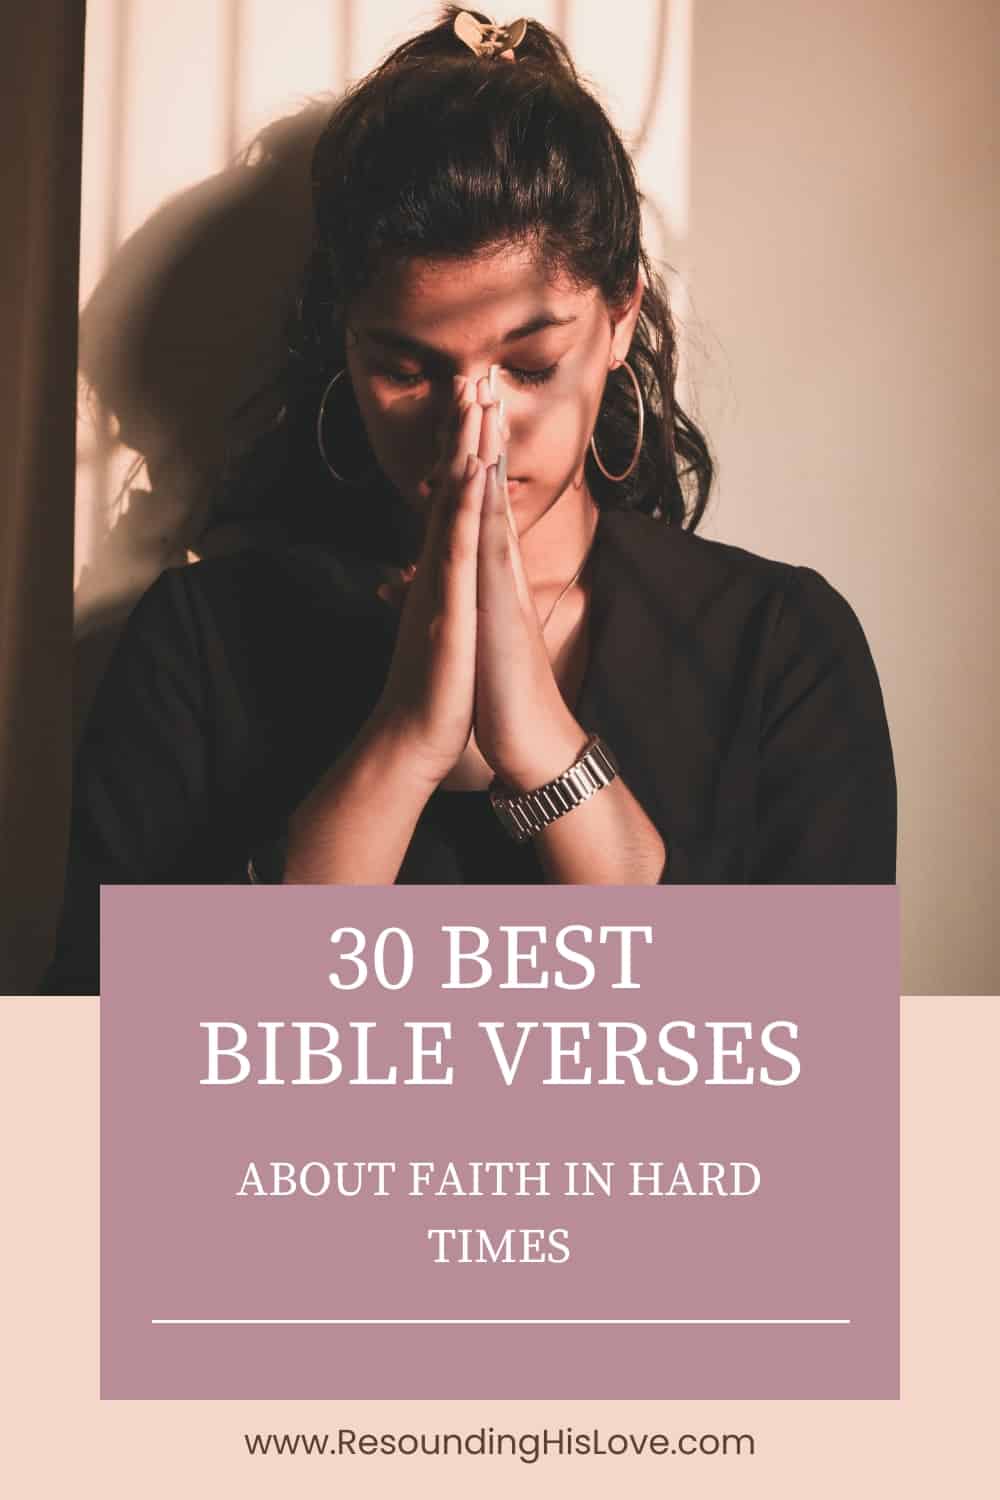 30 Best Bible Verses About Faith In Hard Times